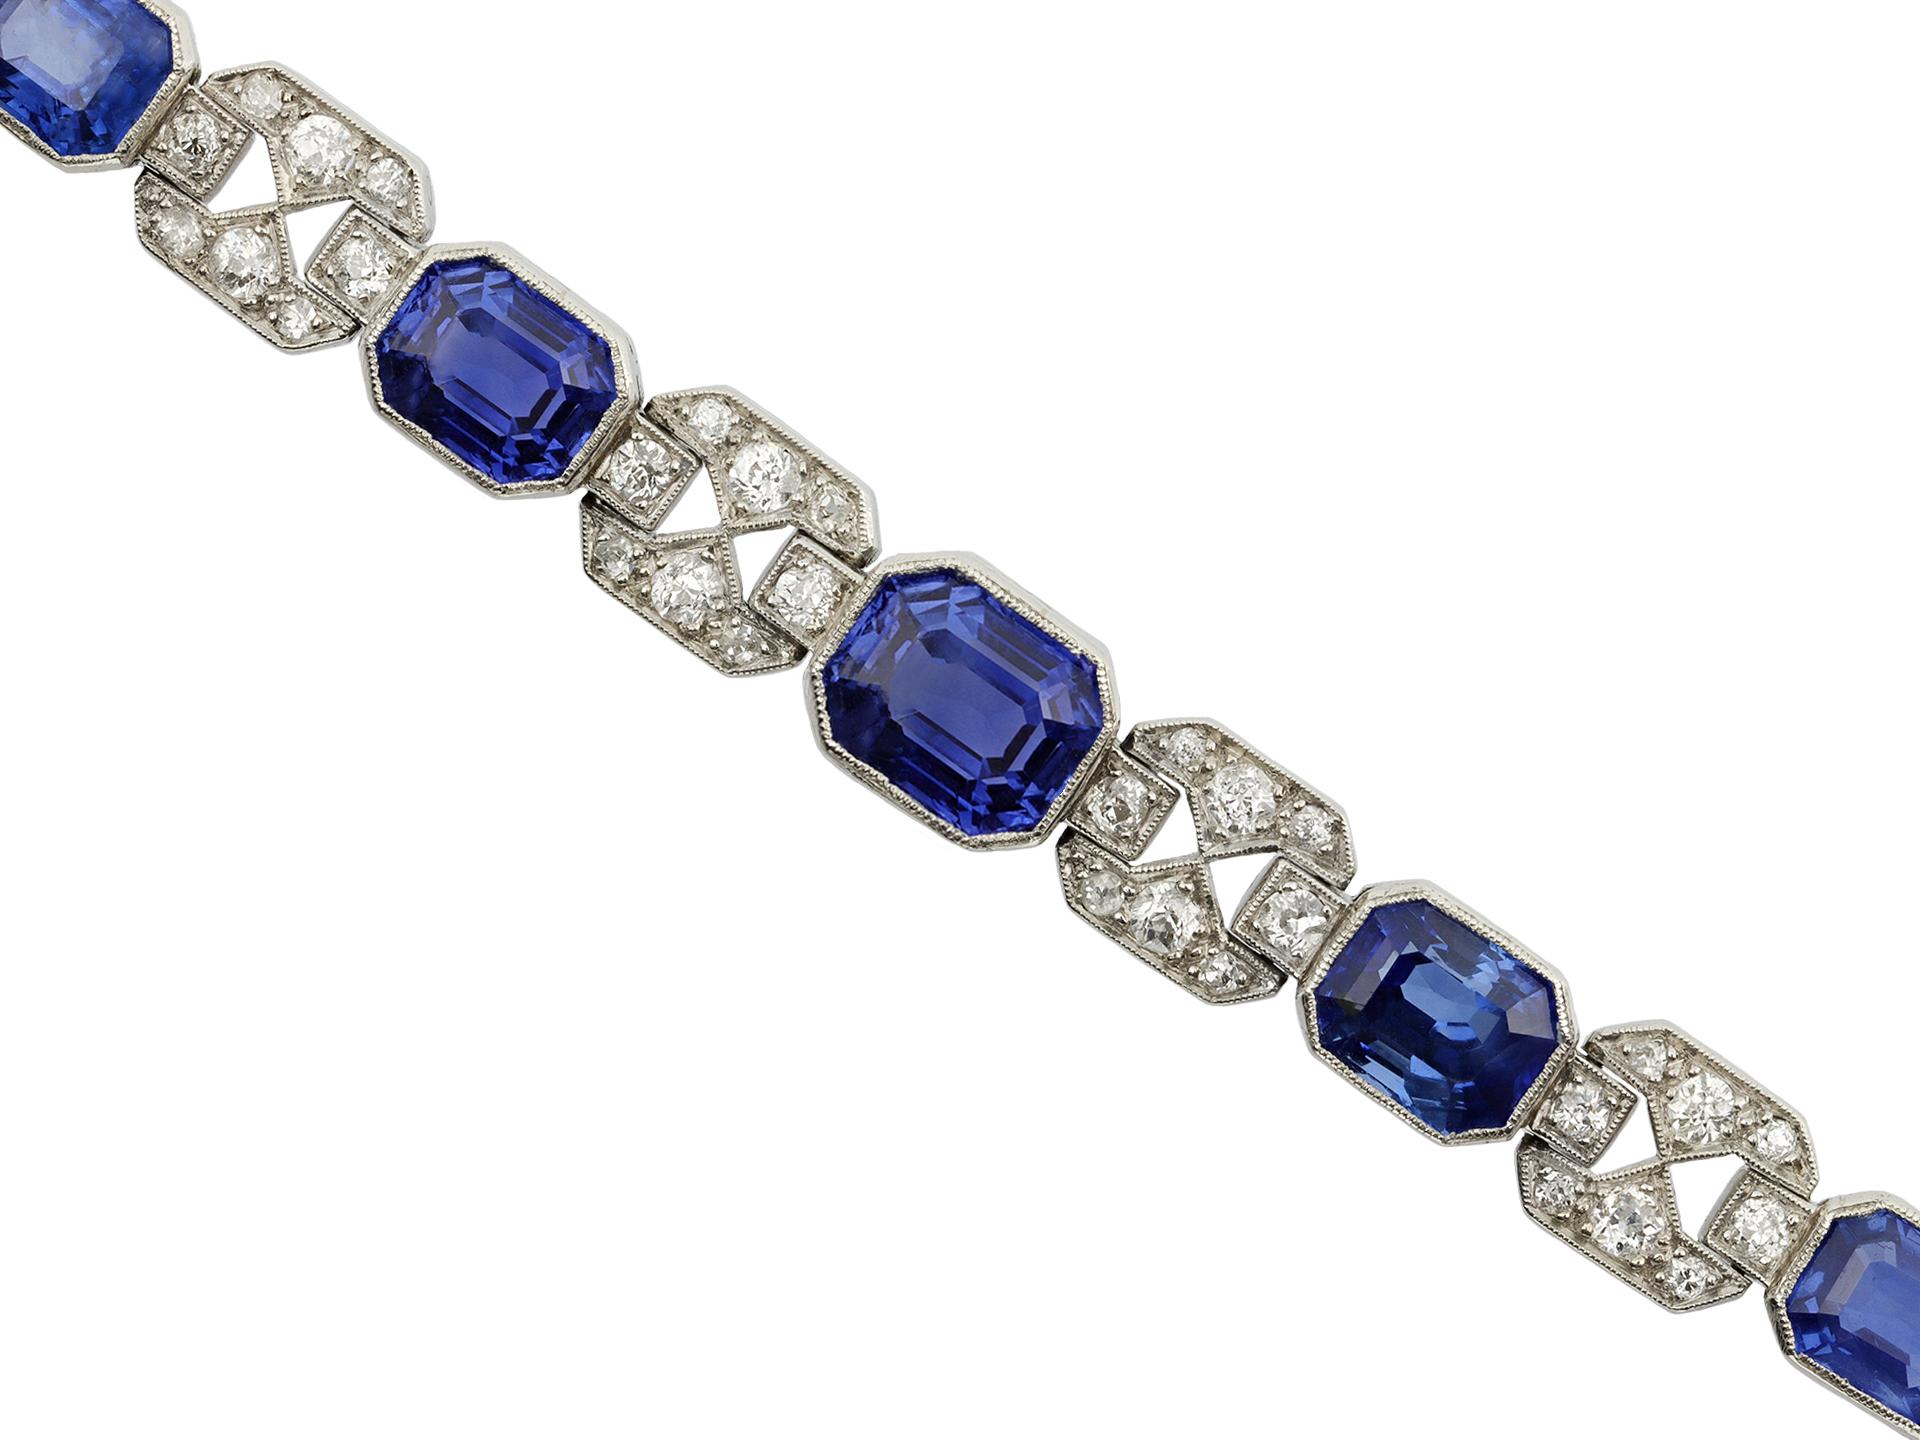 Art Deco sapphire and diamond bracelet. Set with five octagonal emerald-cut natural unenhanced Ceylon sapphires (two of which have been certified as colour change sapphires) in open back rubover settings with an approximate combined weight of 16.00